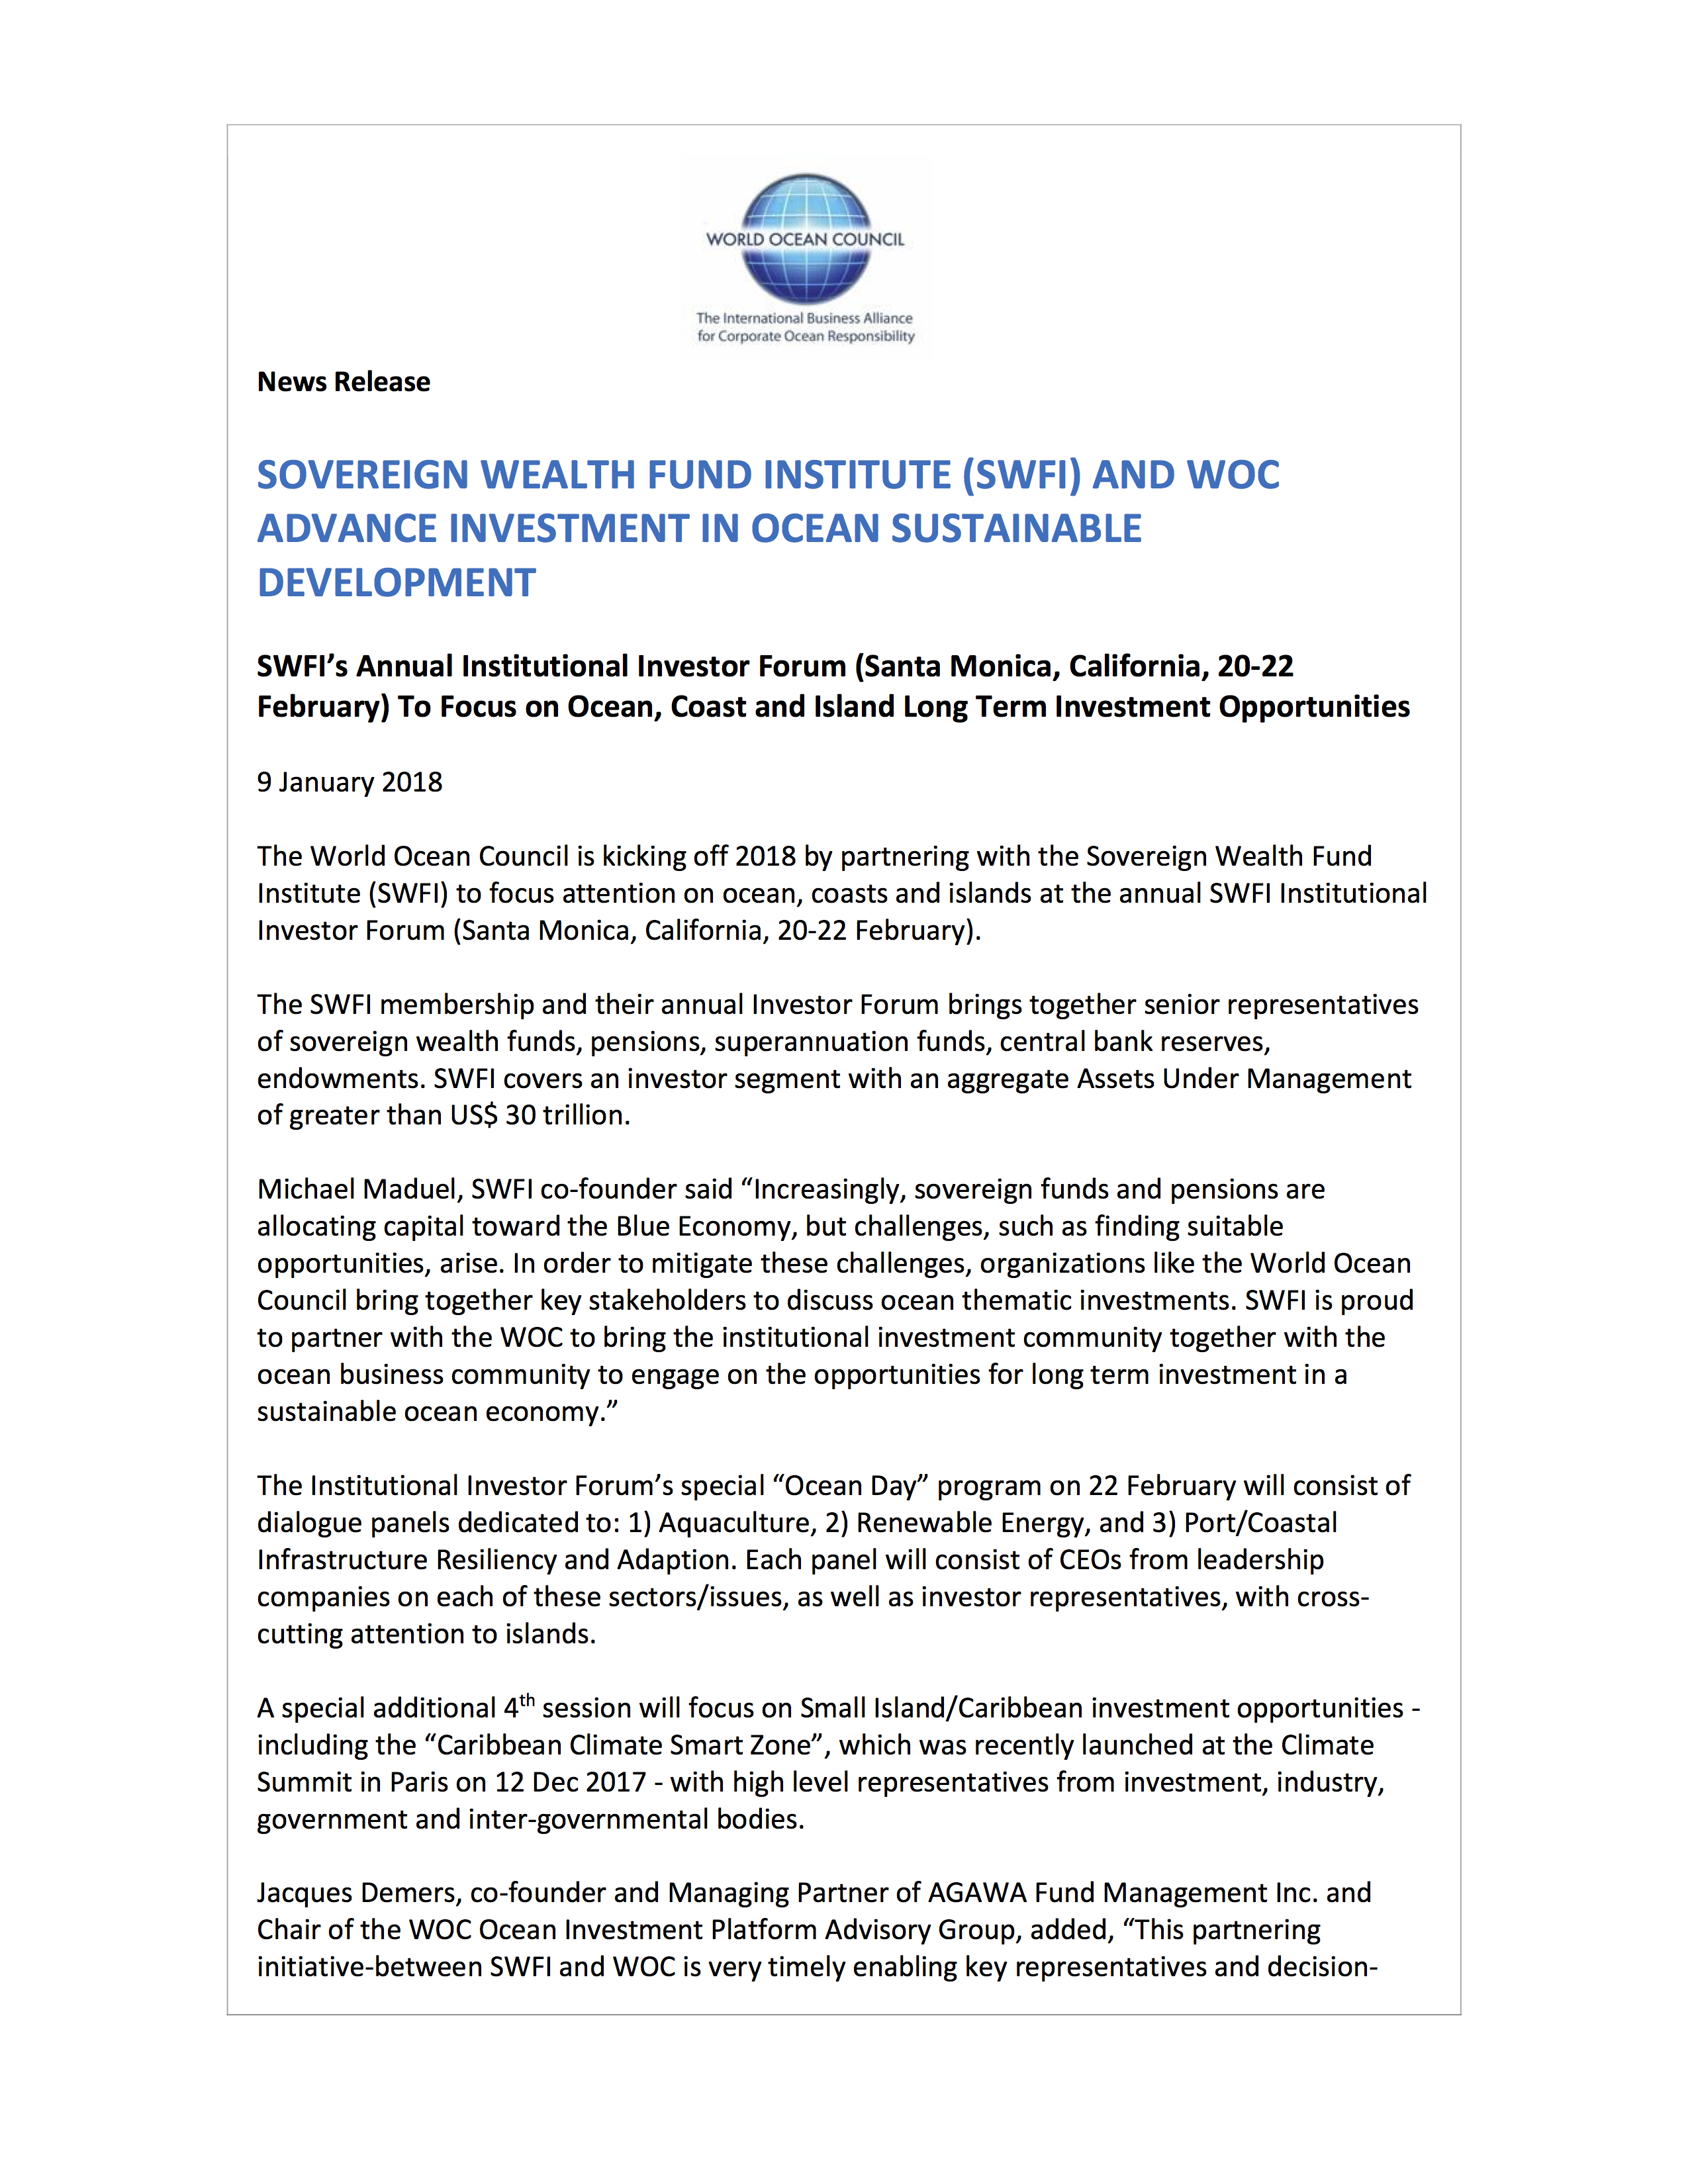 Sovereign Wealth Fund Institute and WOC Advance Ocean Investment